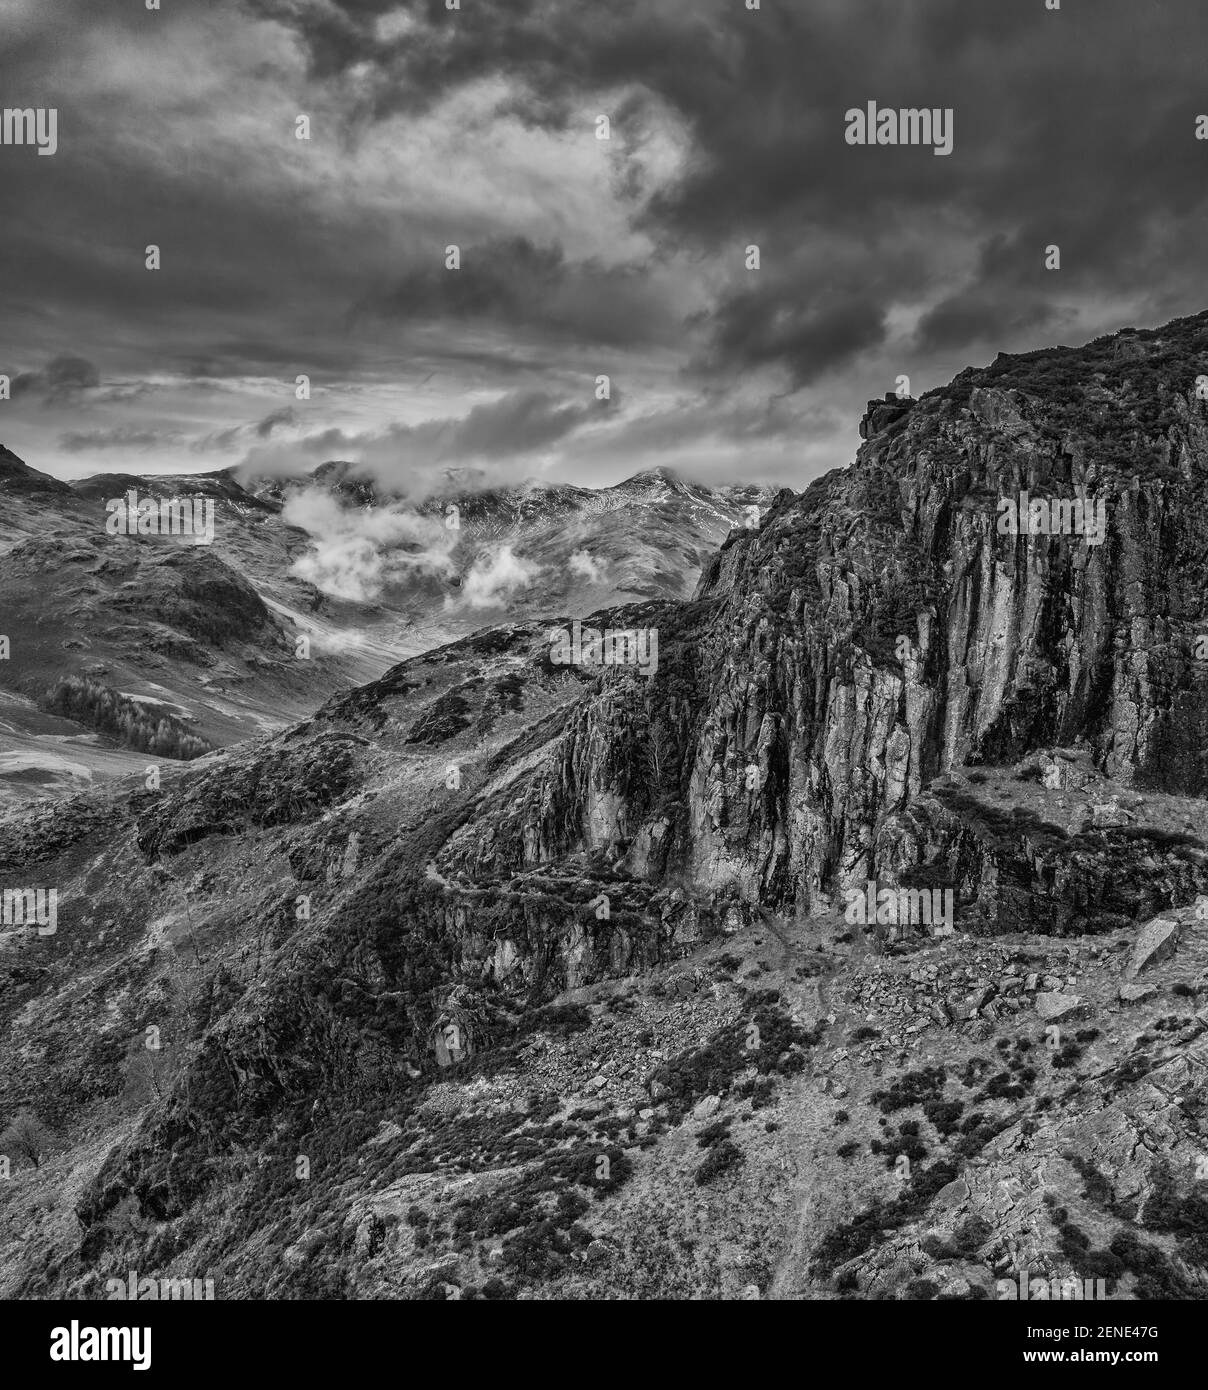 Epic flying drone  black and white landscape image of Langdale pikes and valley in Winter with low level clouds and mist swirling around Stock Photo